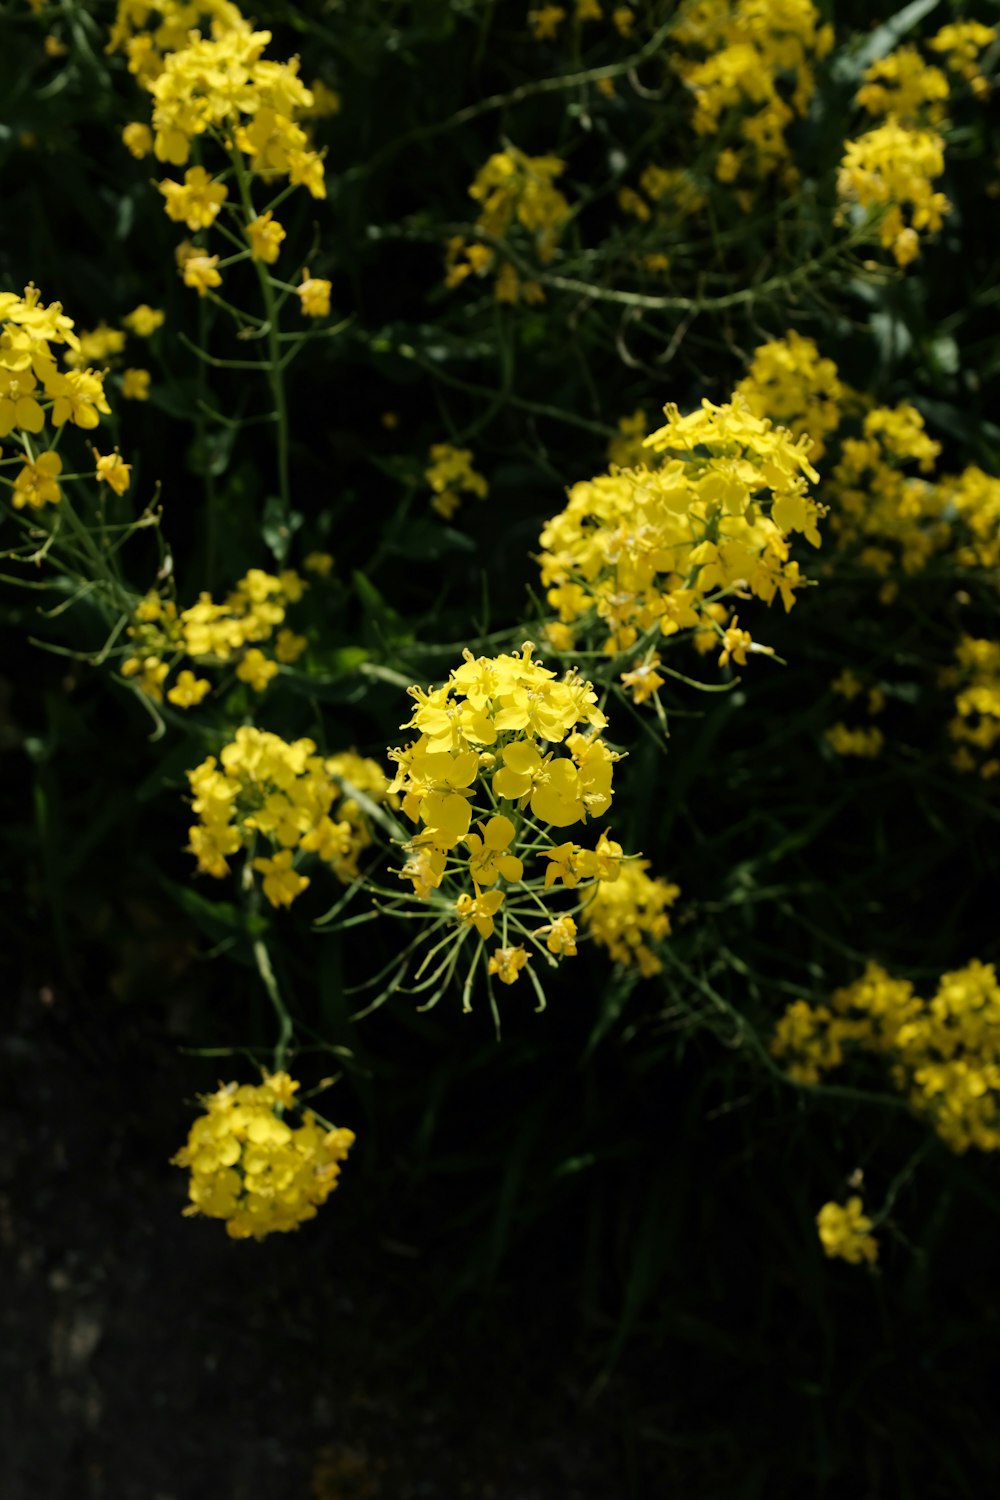 yellow flowers with green leaves